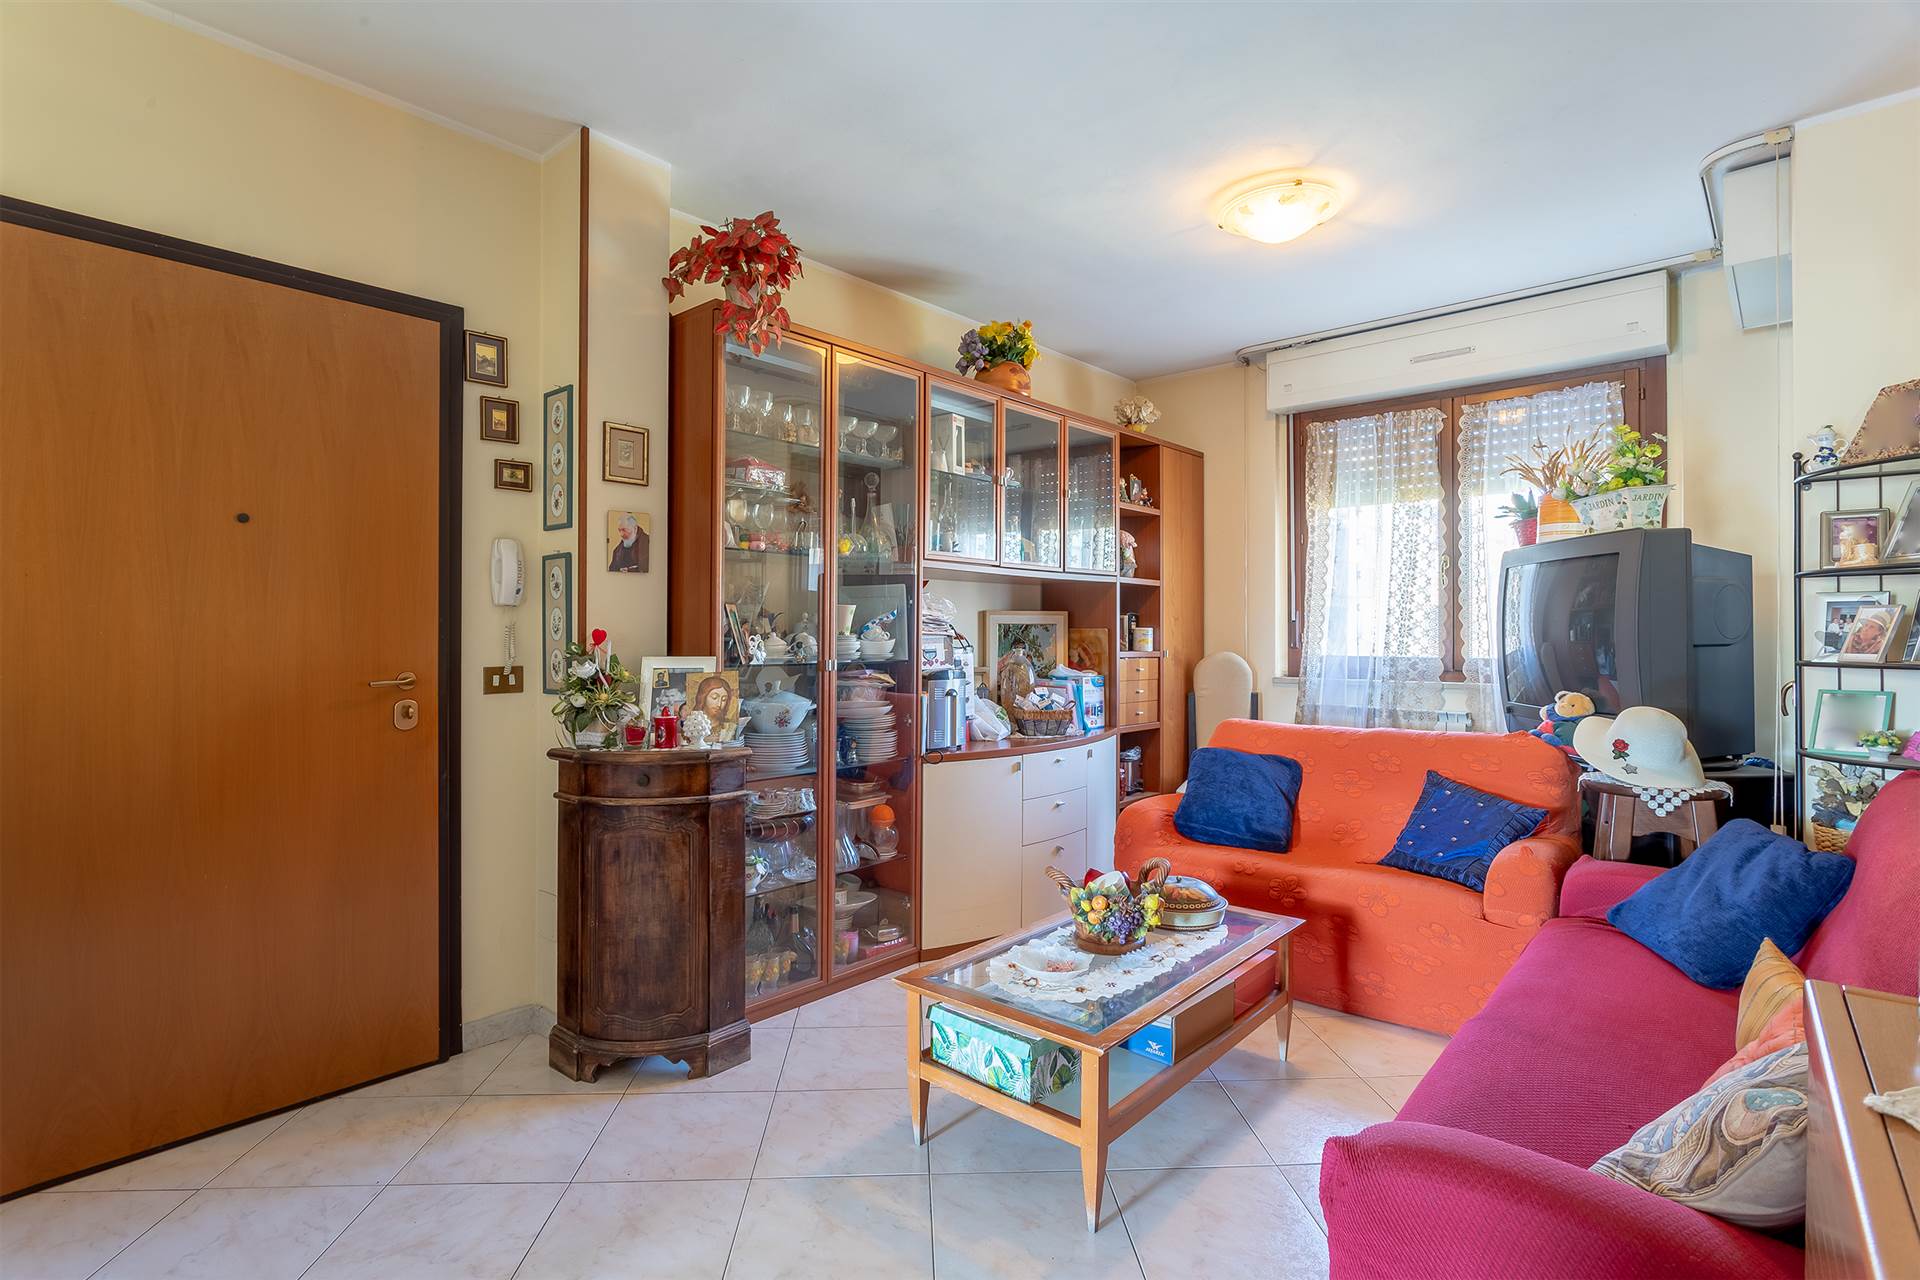 SAN LORENZO, CAMPI BISENZIO, Apartment for sale of 81 Sq. mt., Good condition, Heating Individual heating system, Energetic class: G, placed at 4° on 